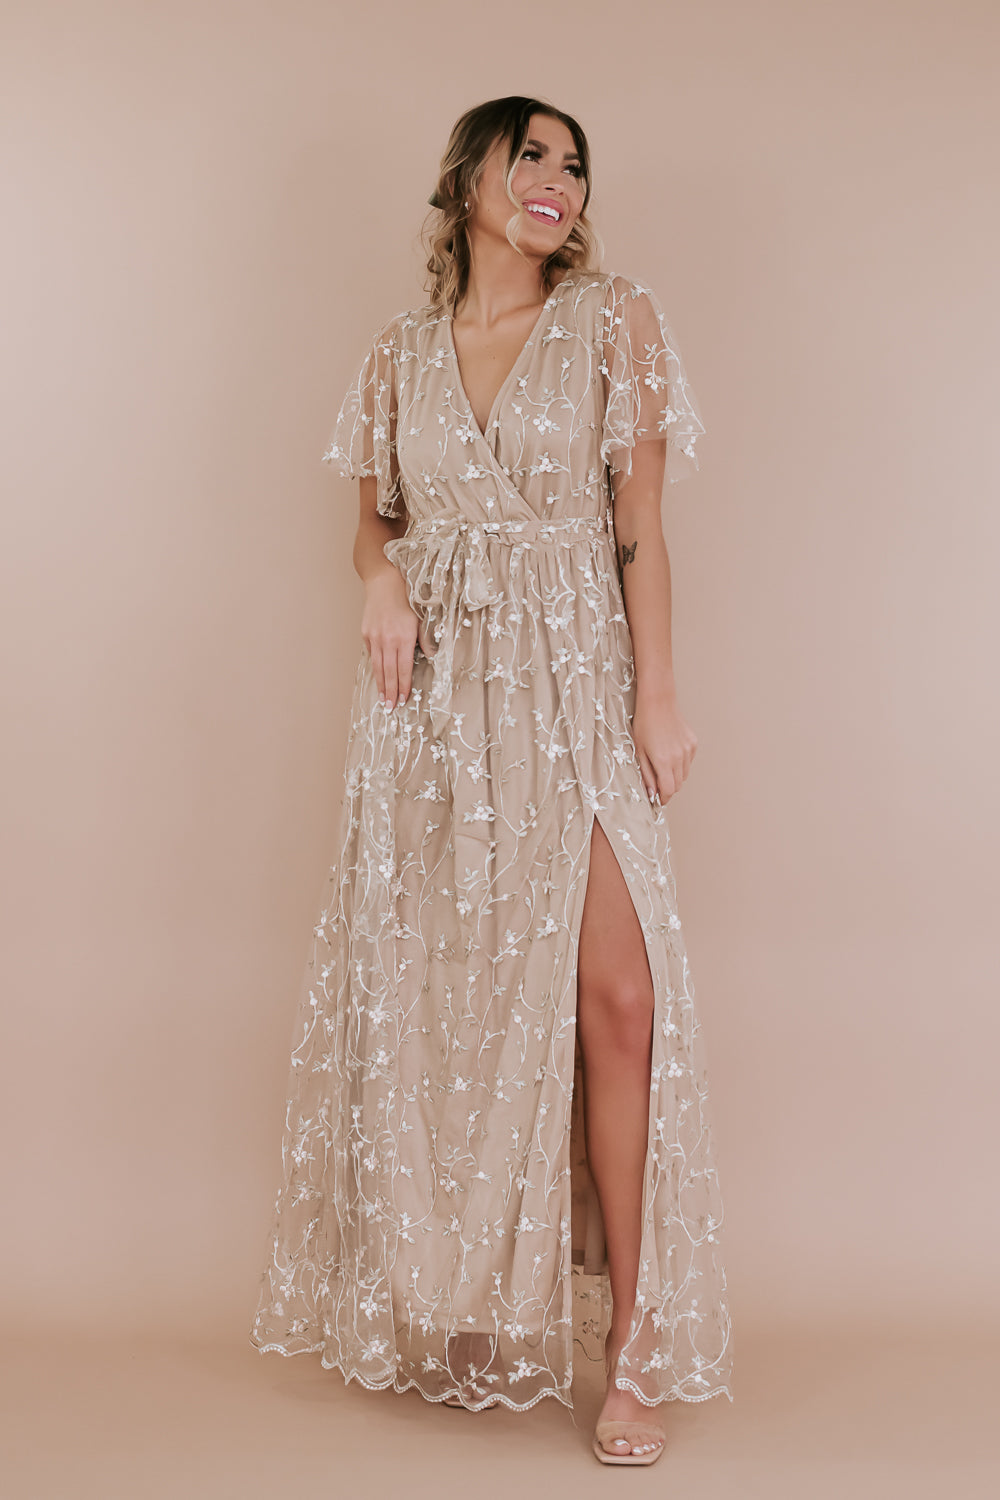 ECB Exclusive: Dreamy Floral Embroidered Maxi Dress